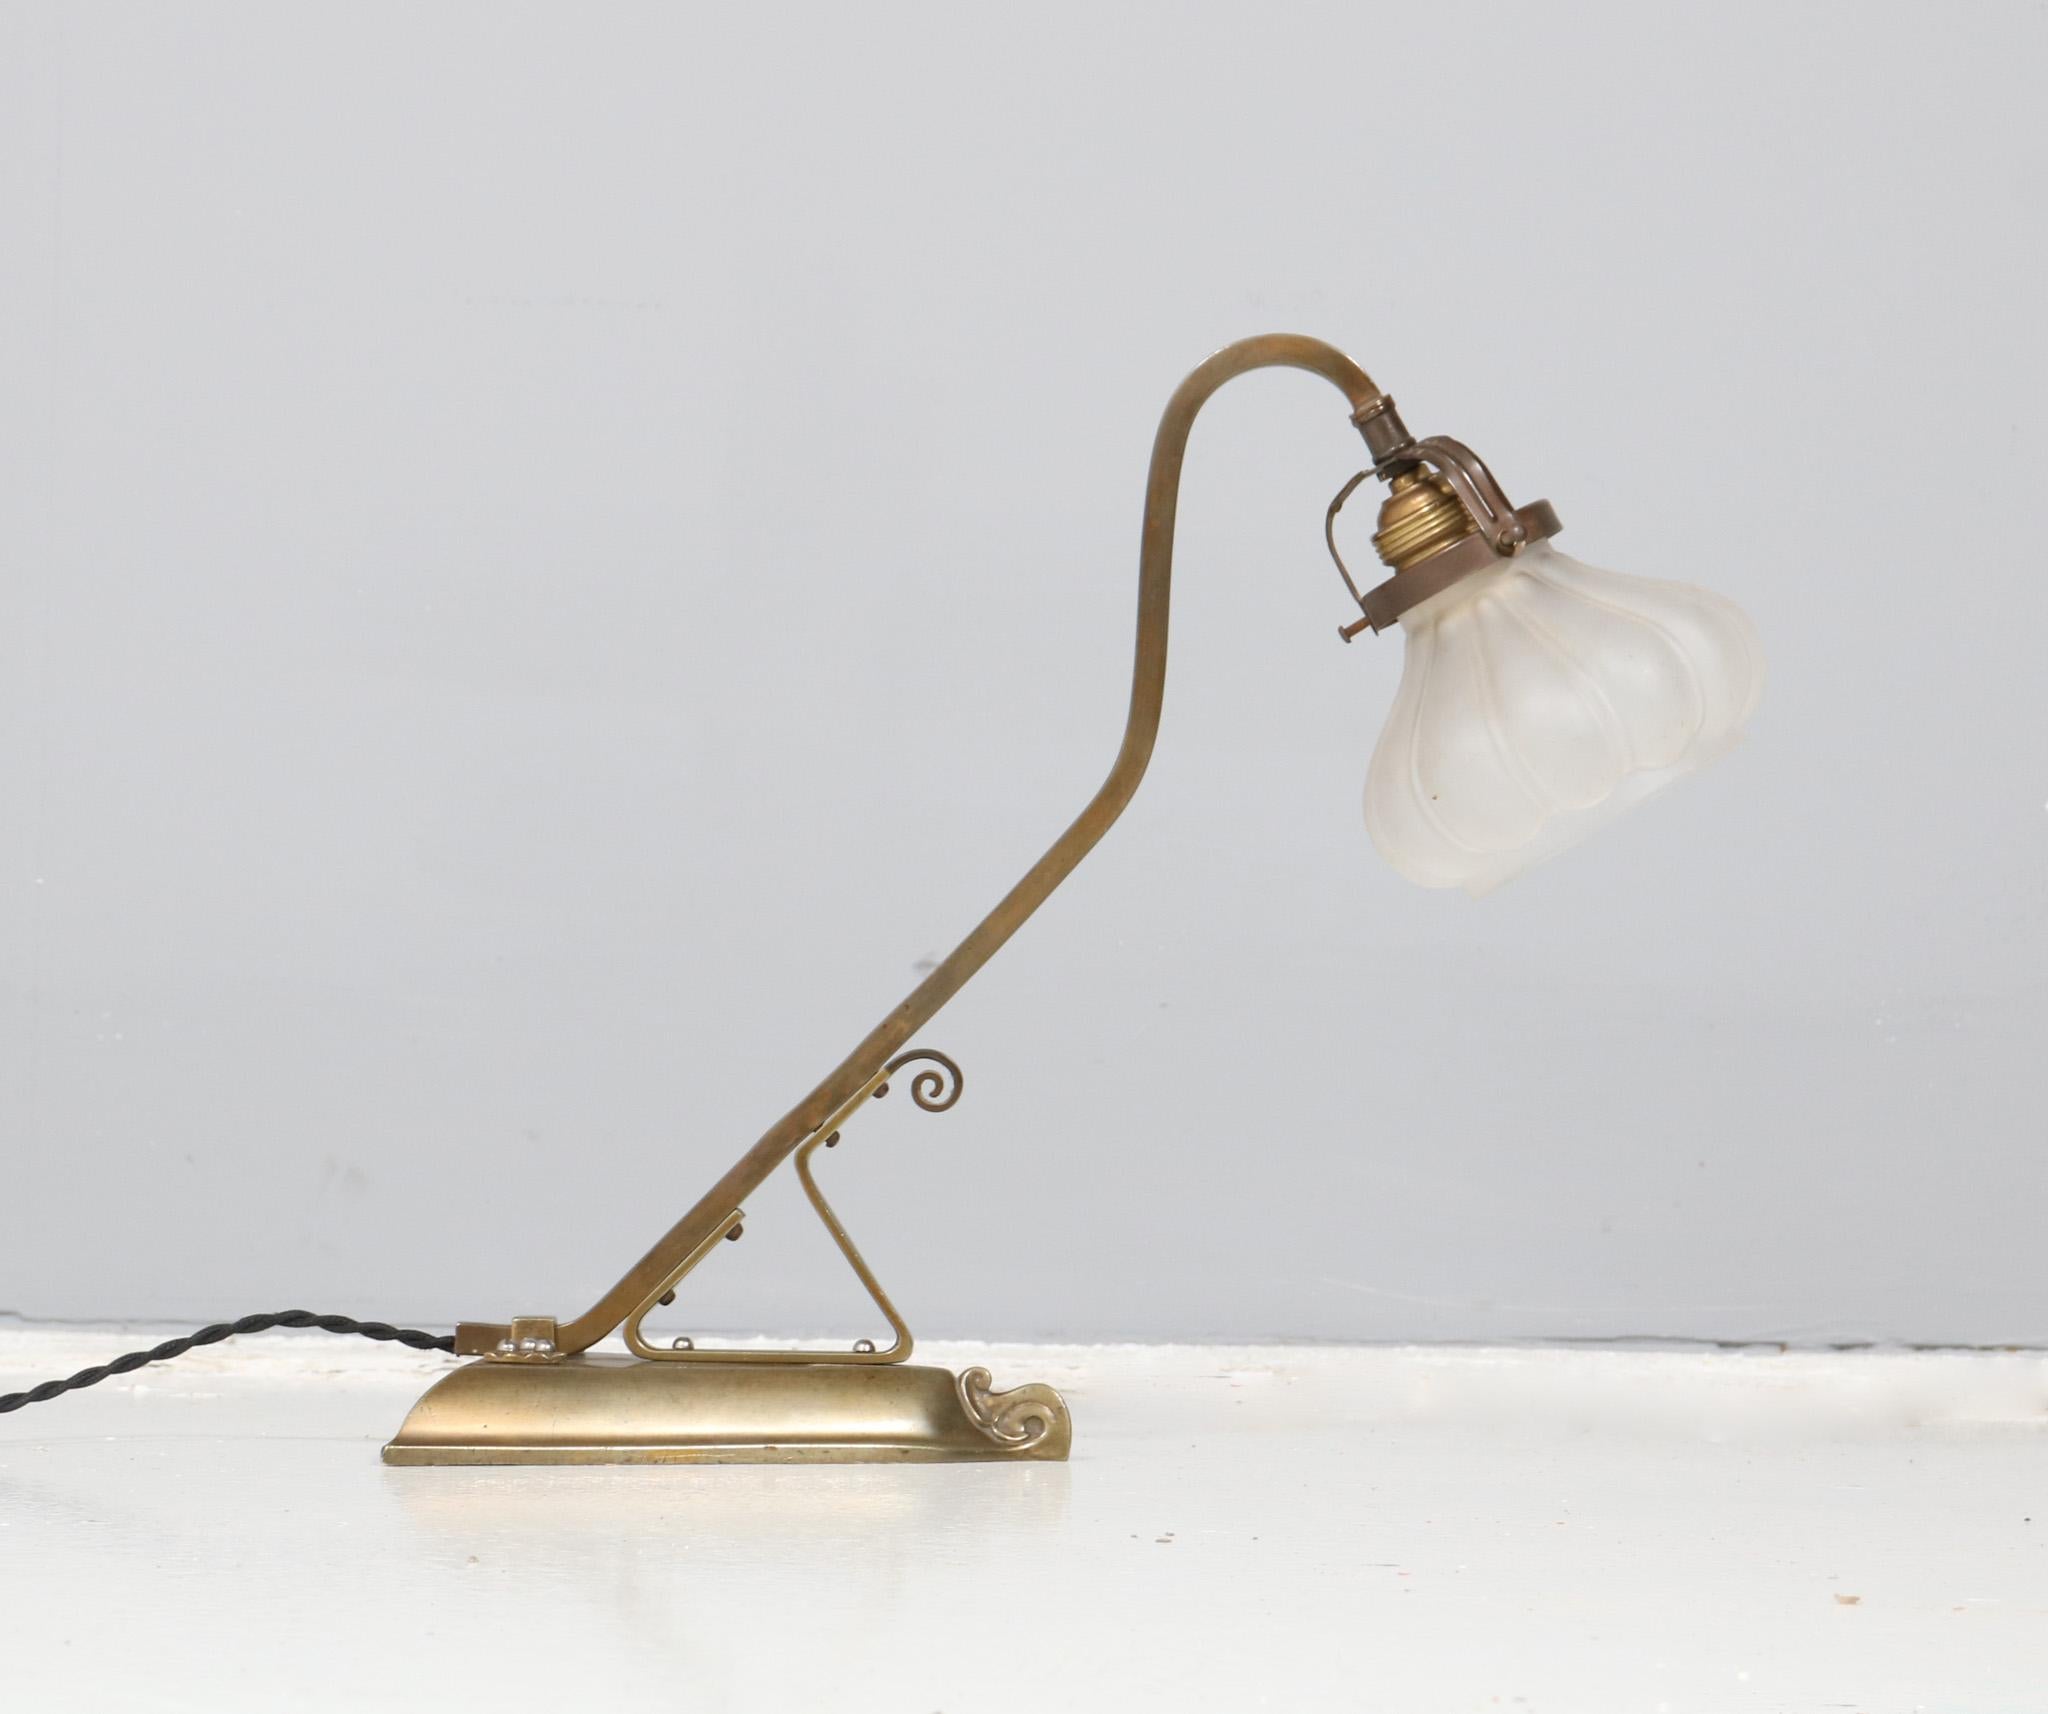  Patinated Brass Art Nouveau Table Lamp or Desk Lamp, 1900s In Good Condition For Sale In Amsterdam, NL